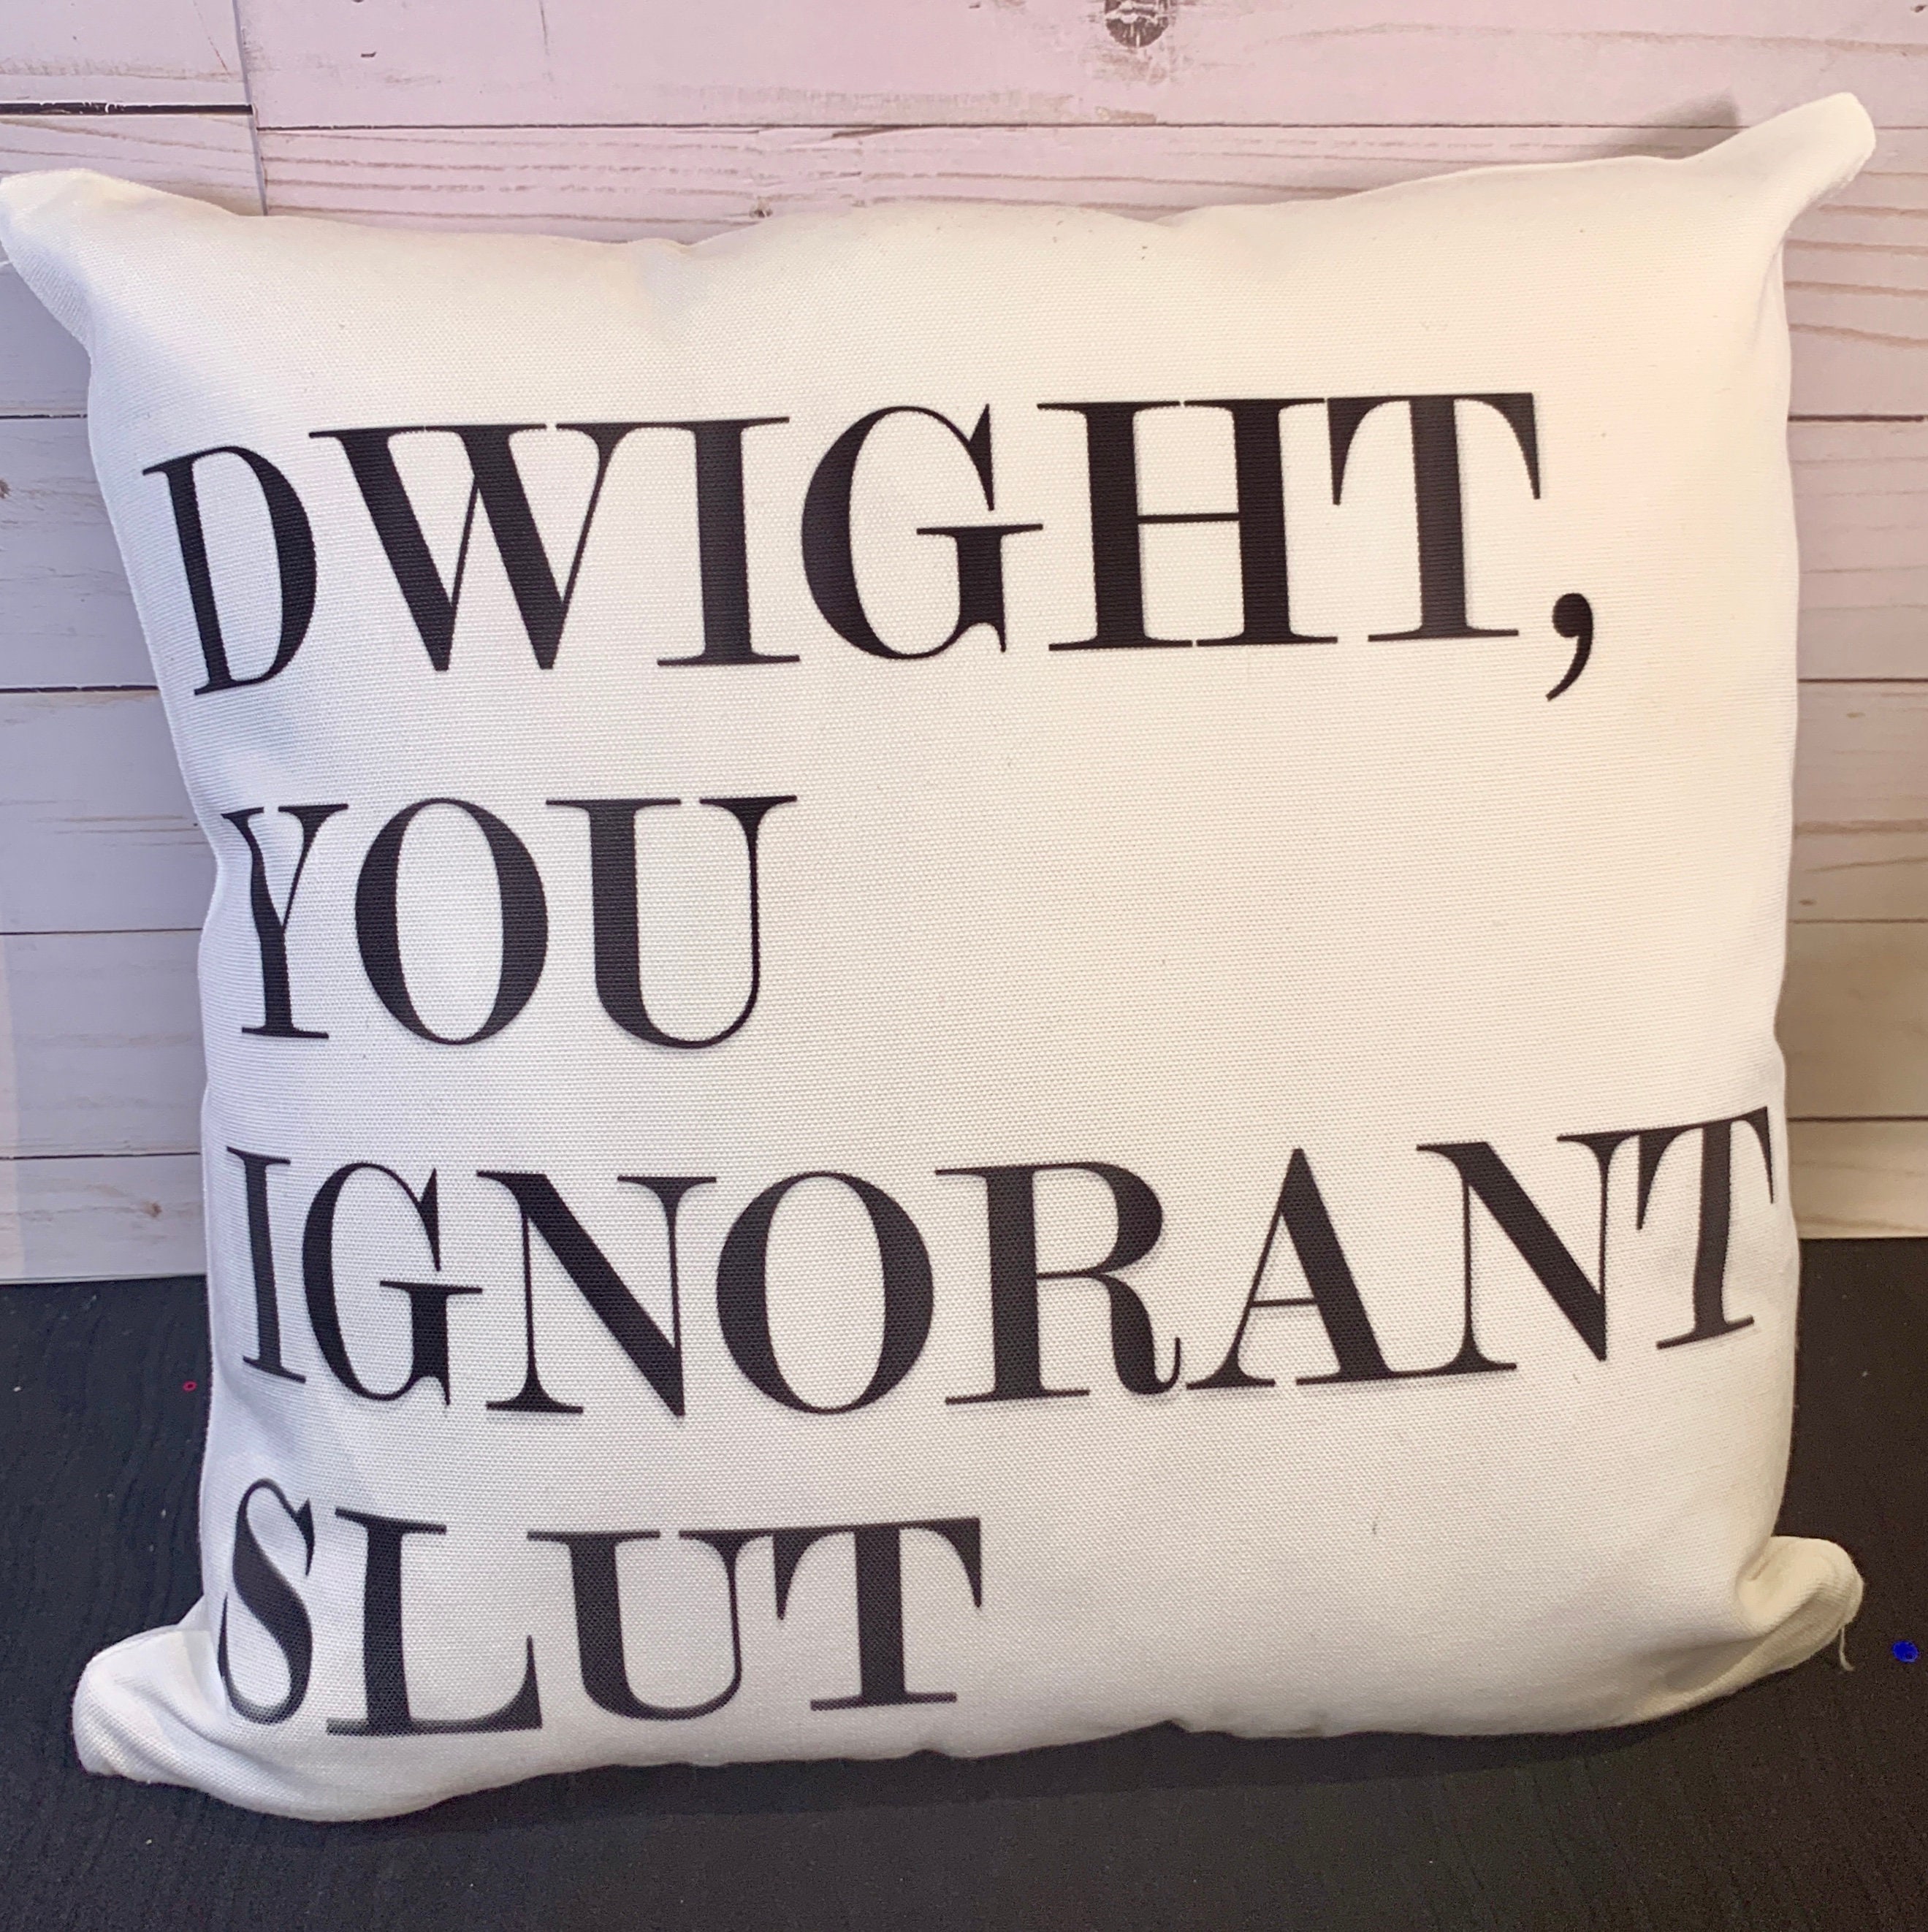 The Office TV Show Pillow Cover Dwight You Ignorant Pillow Case Linen  Cotton Michael Scott Quote Cushion Cover Best Friend Gift Funny Pillow Case